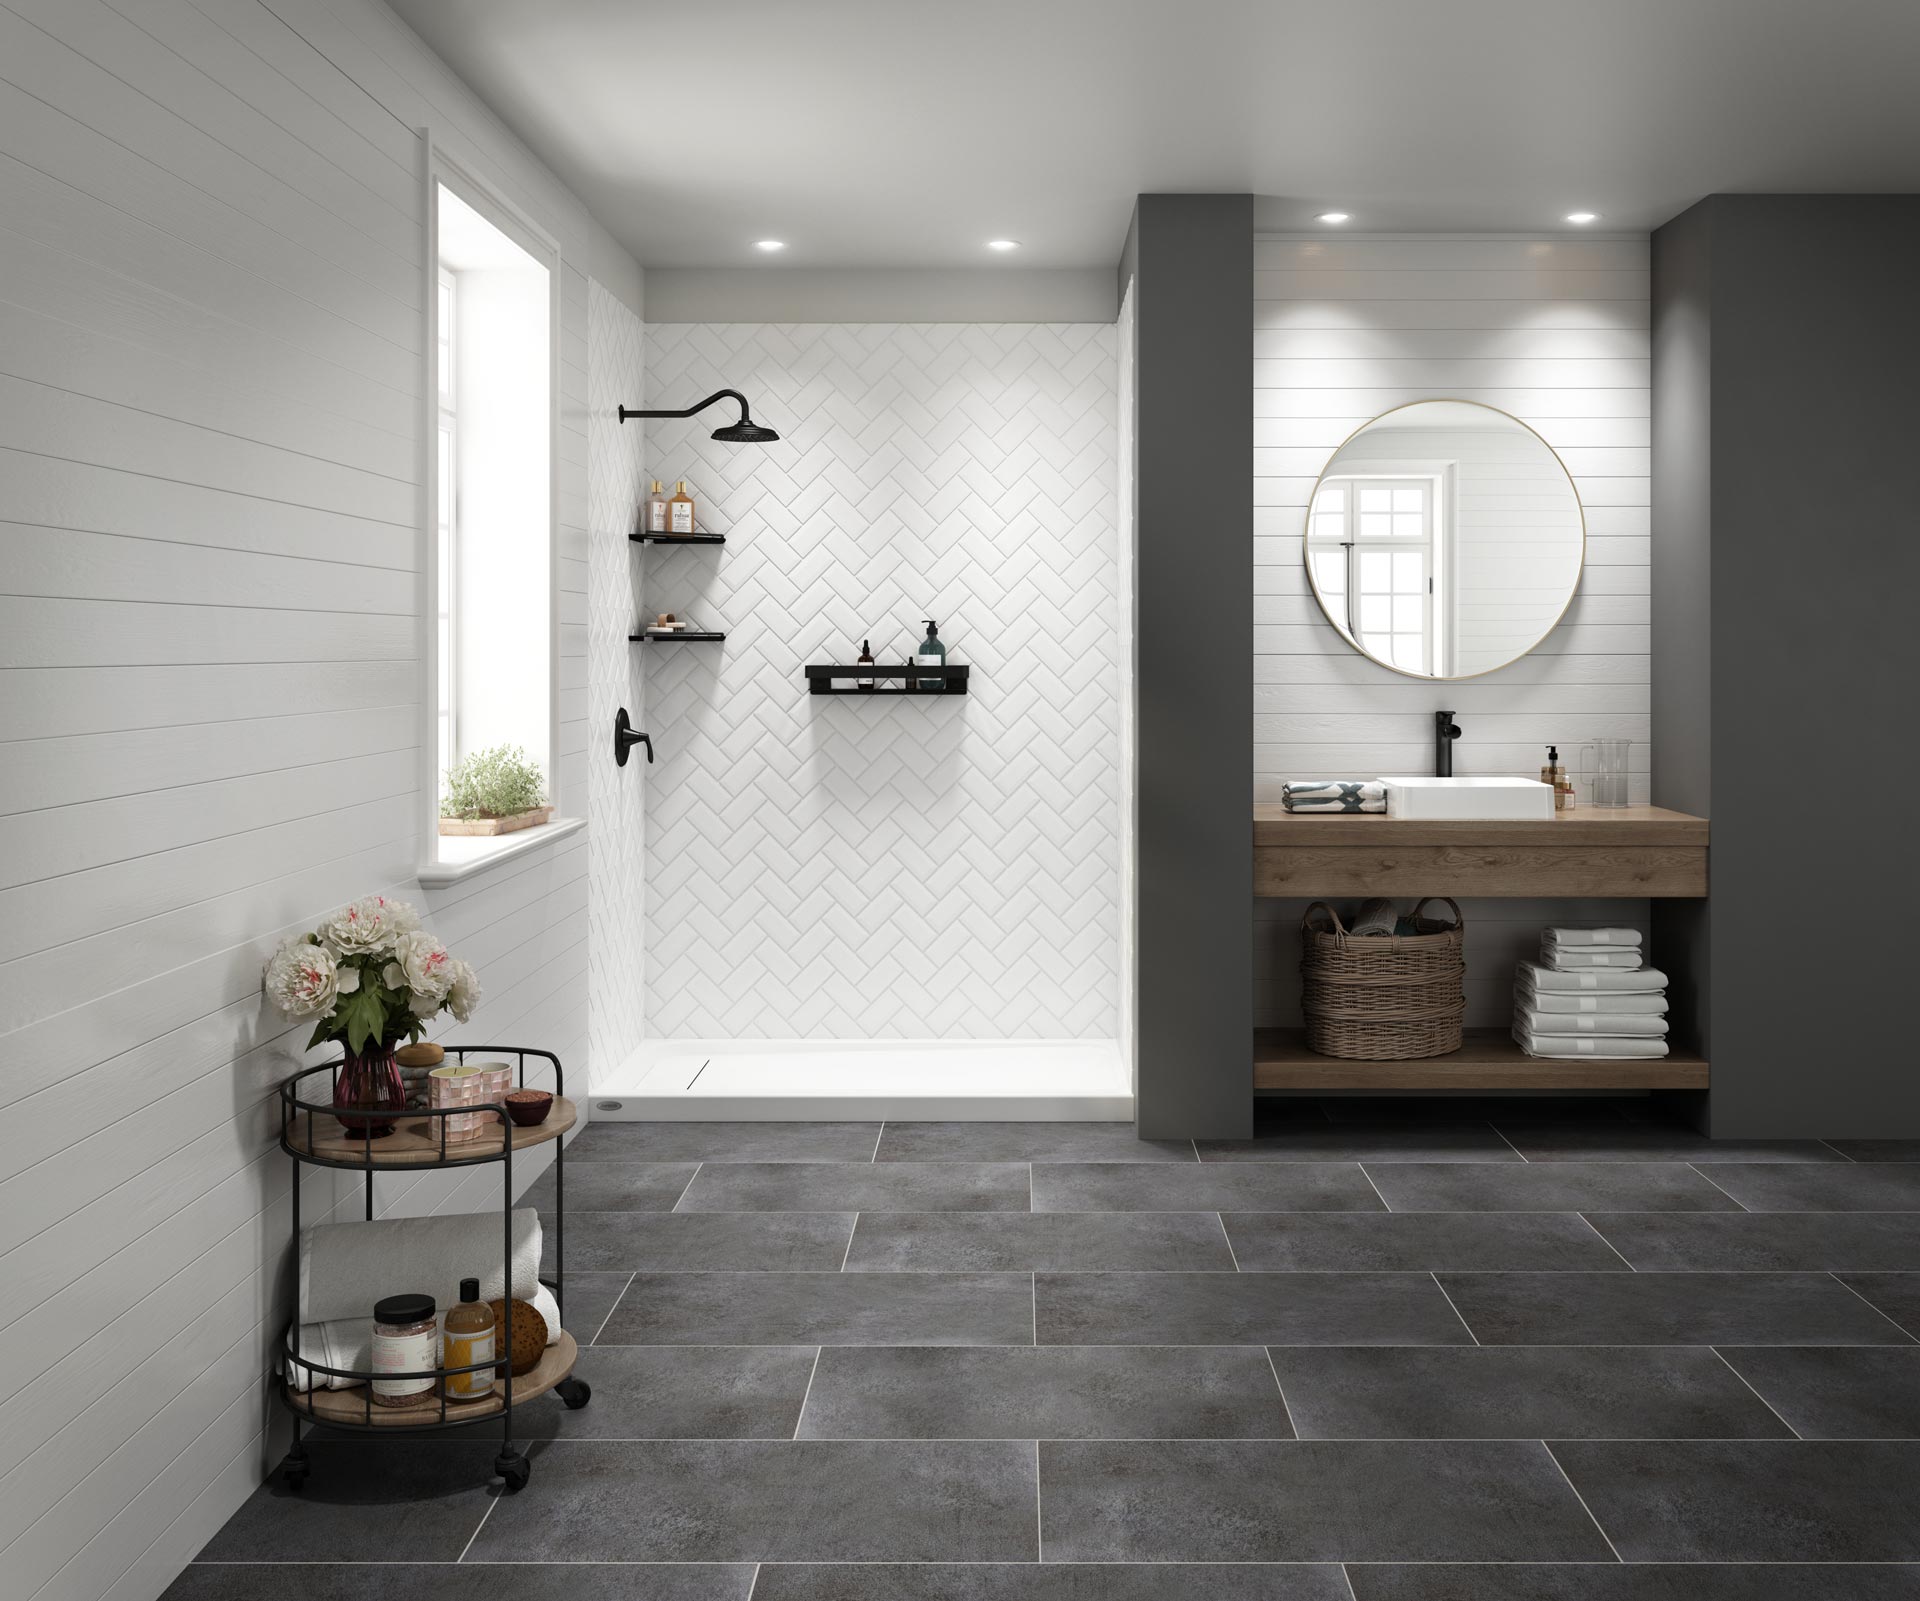 A beautiful bathroom with dark gray tile flooring, a wood vanity, and a shower that has a white herringbone tile wall system.